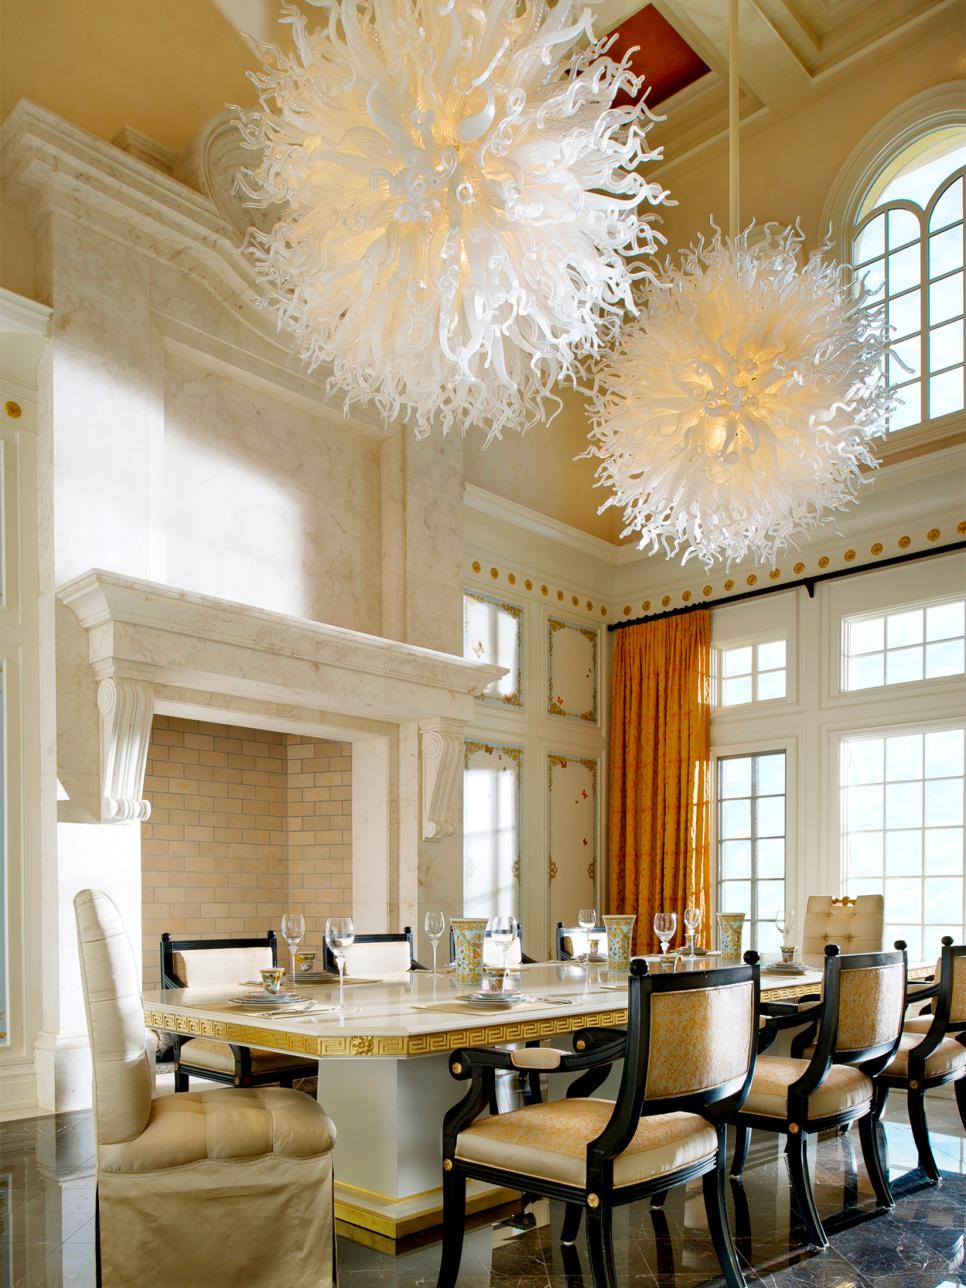 Traditional Dining Table With Upholstered Chairs and Chandelier Art